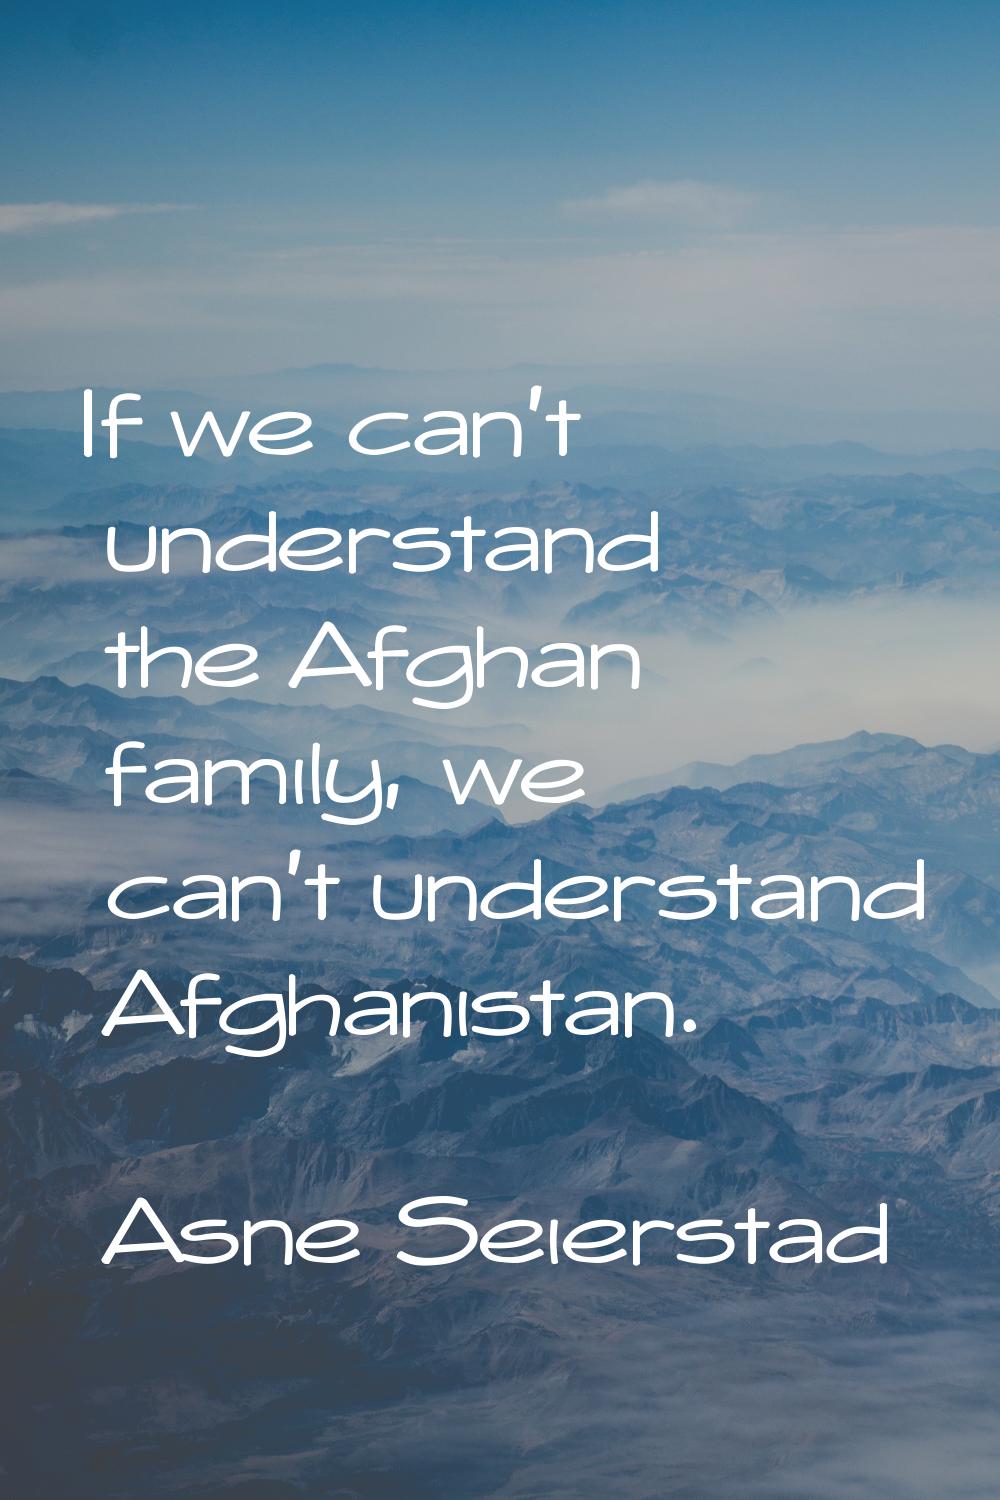 If we can't understand the Afghan family, we can't understand Afghanistan.